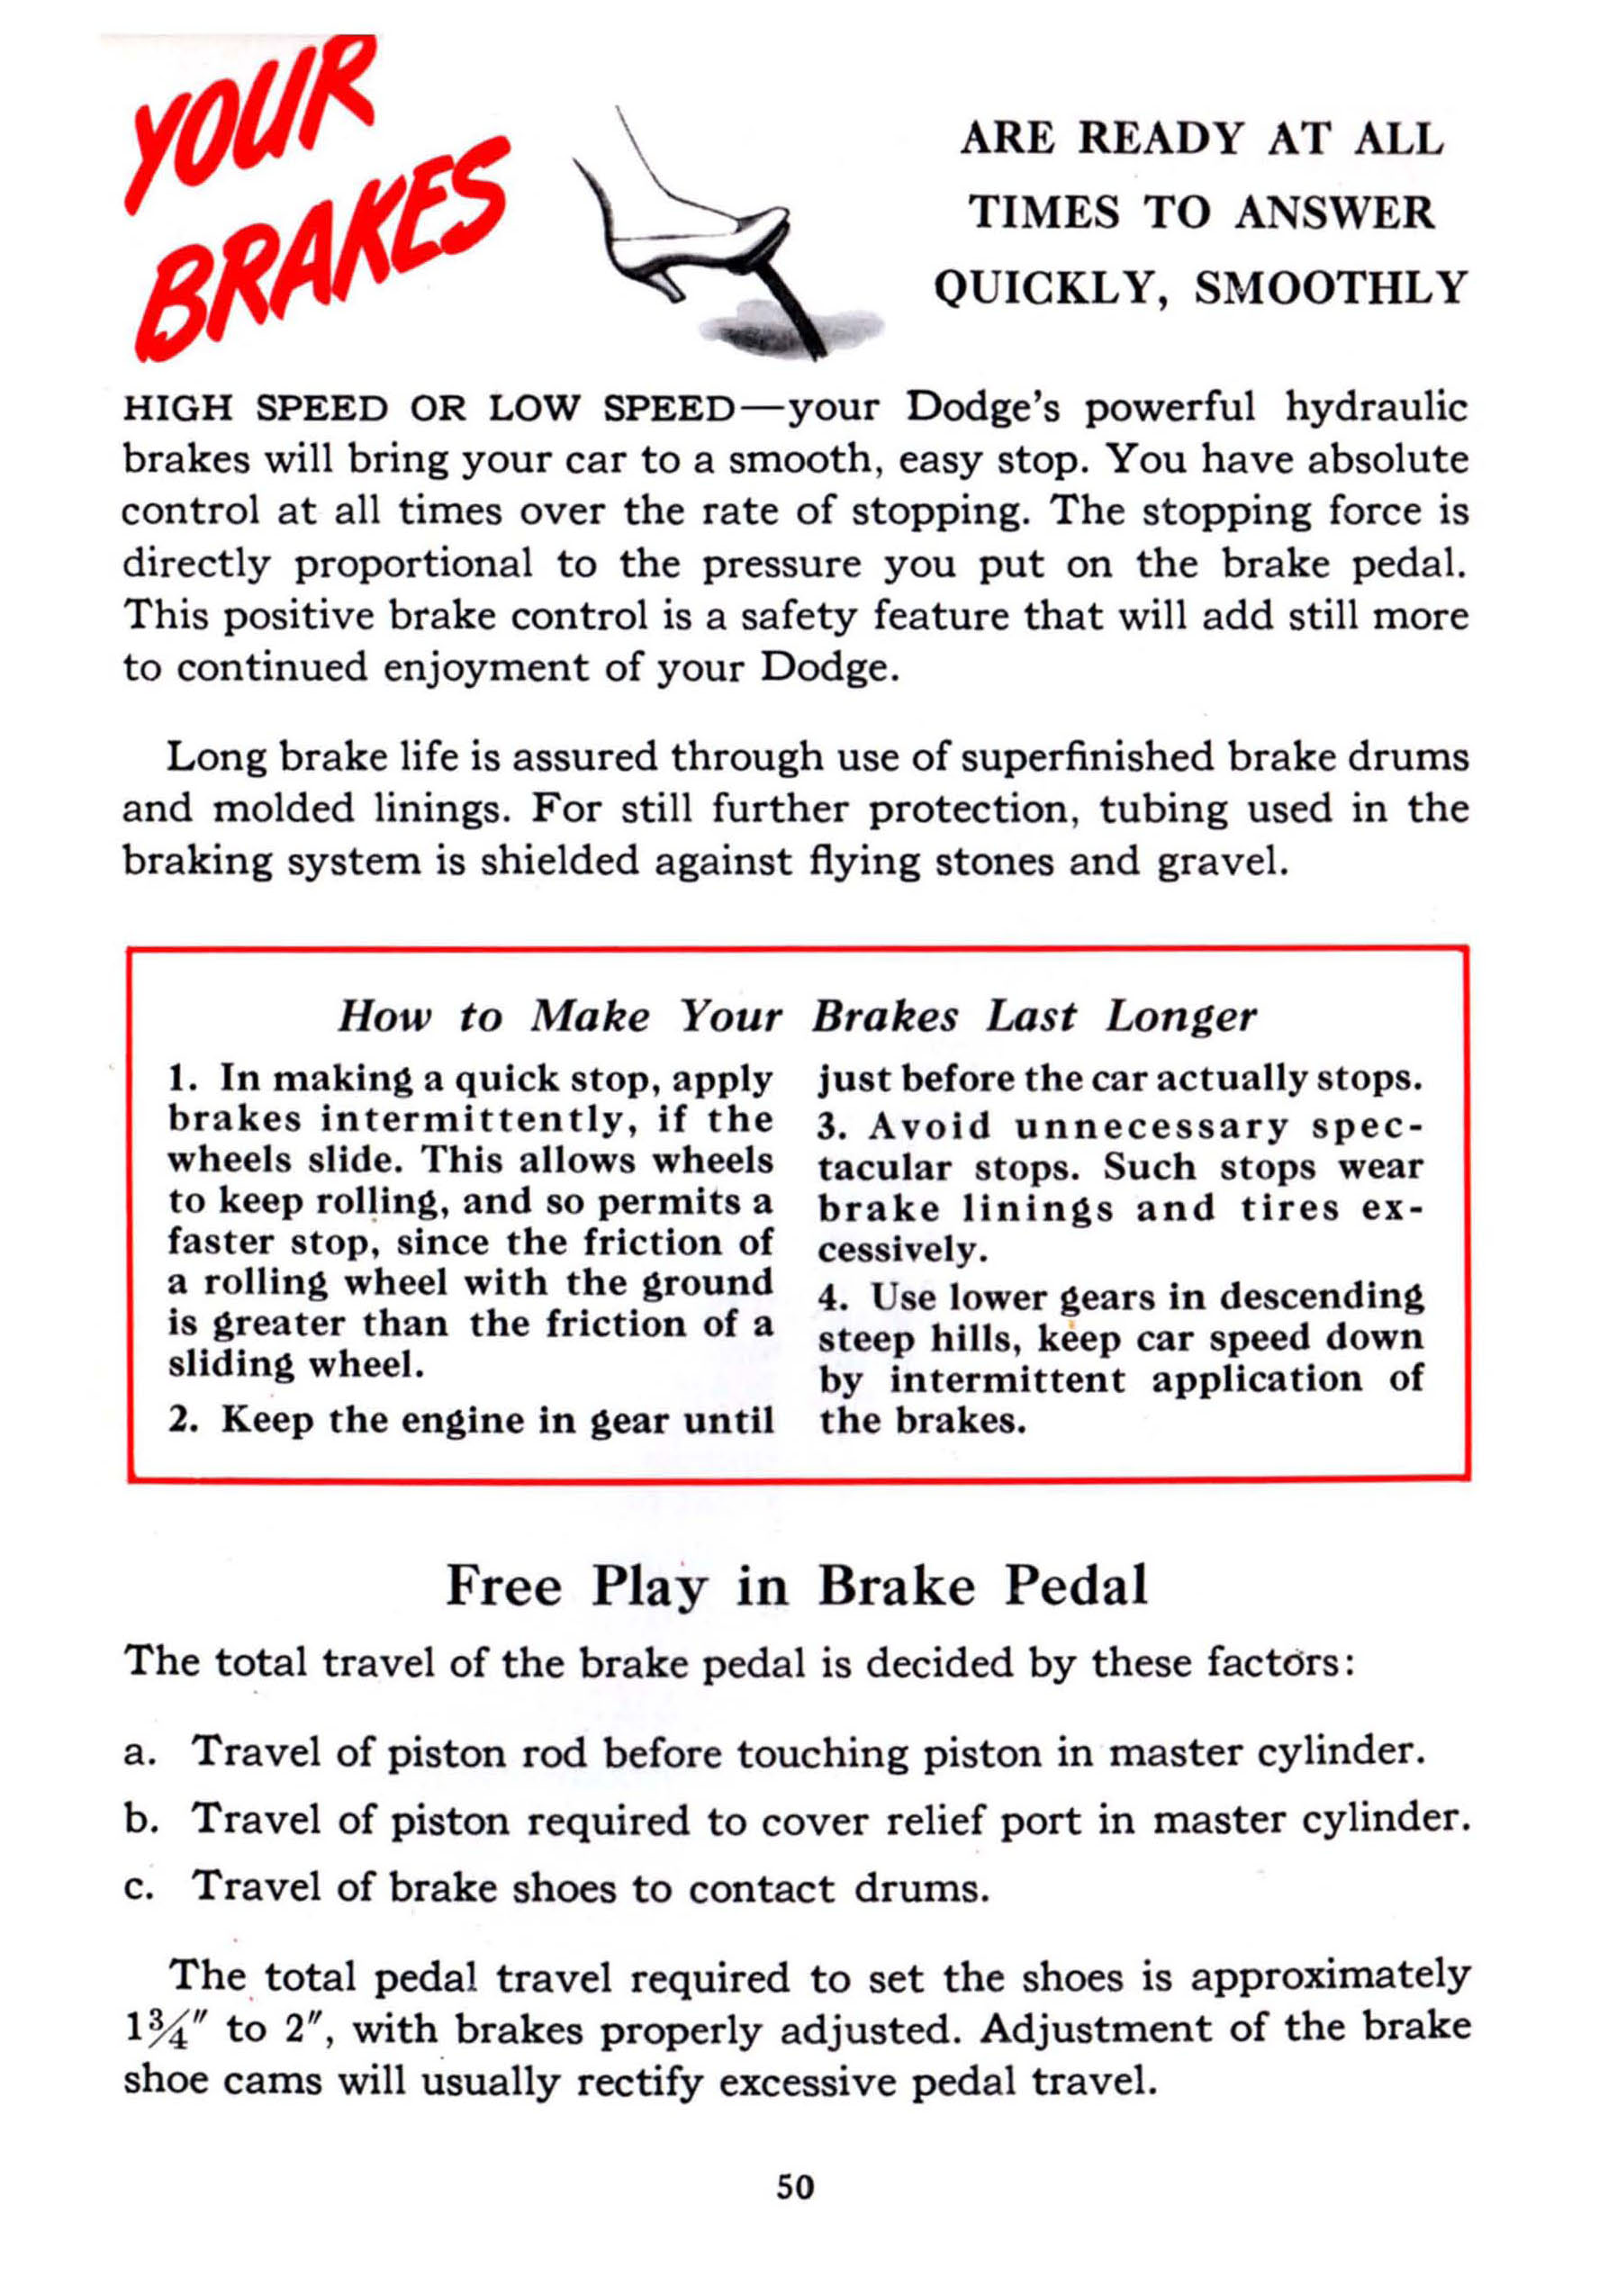 1941_Dodge_Owners_Manual-50